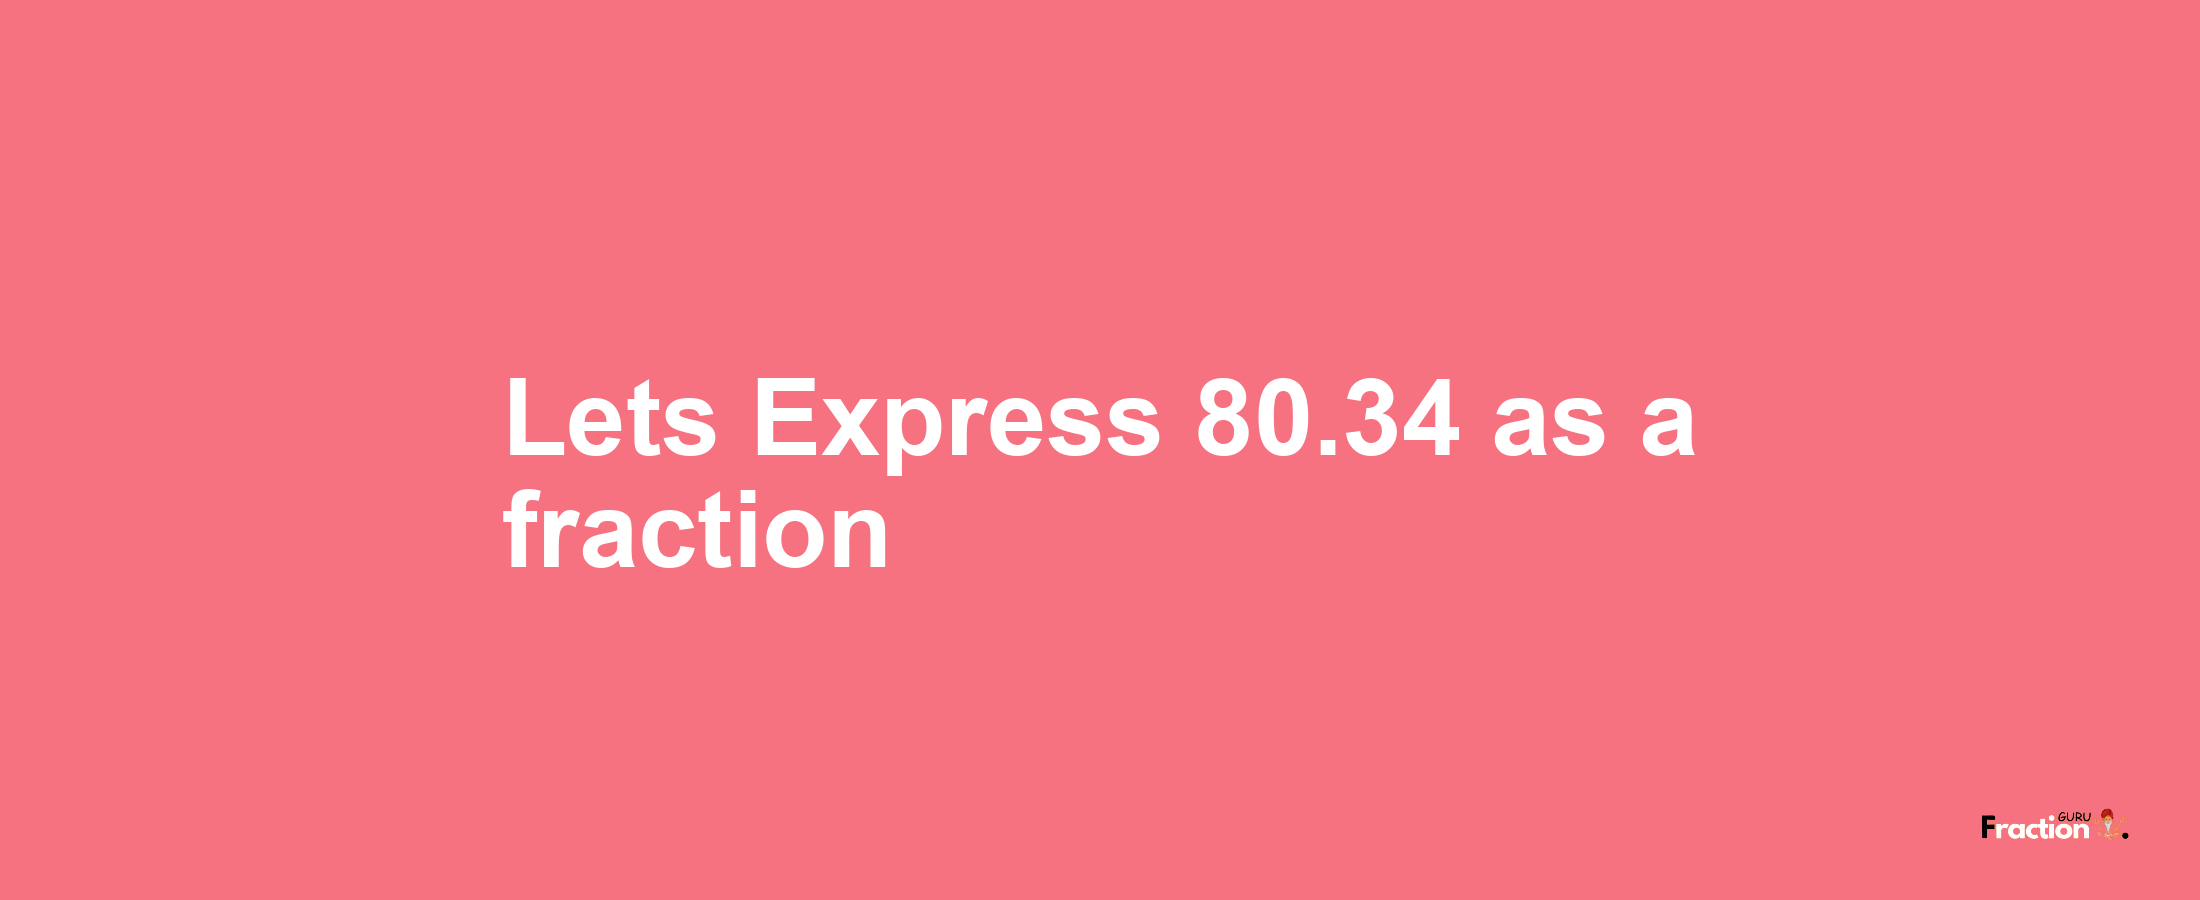 Lets Express 80.34 as afraction